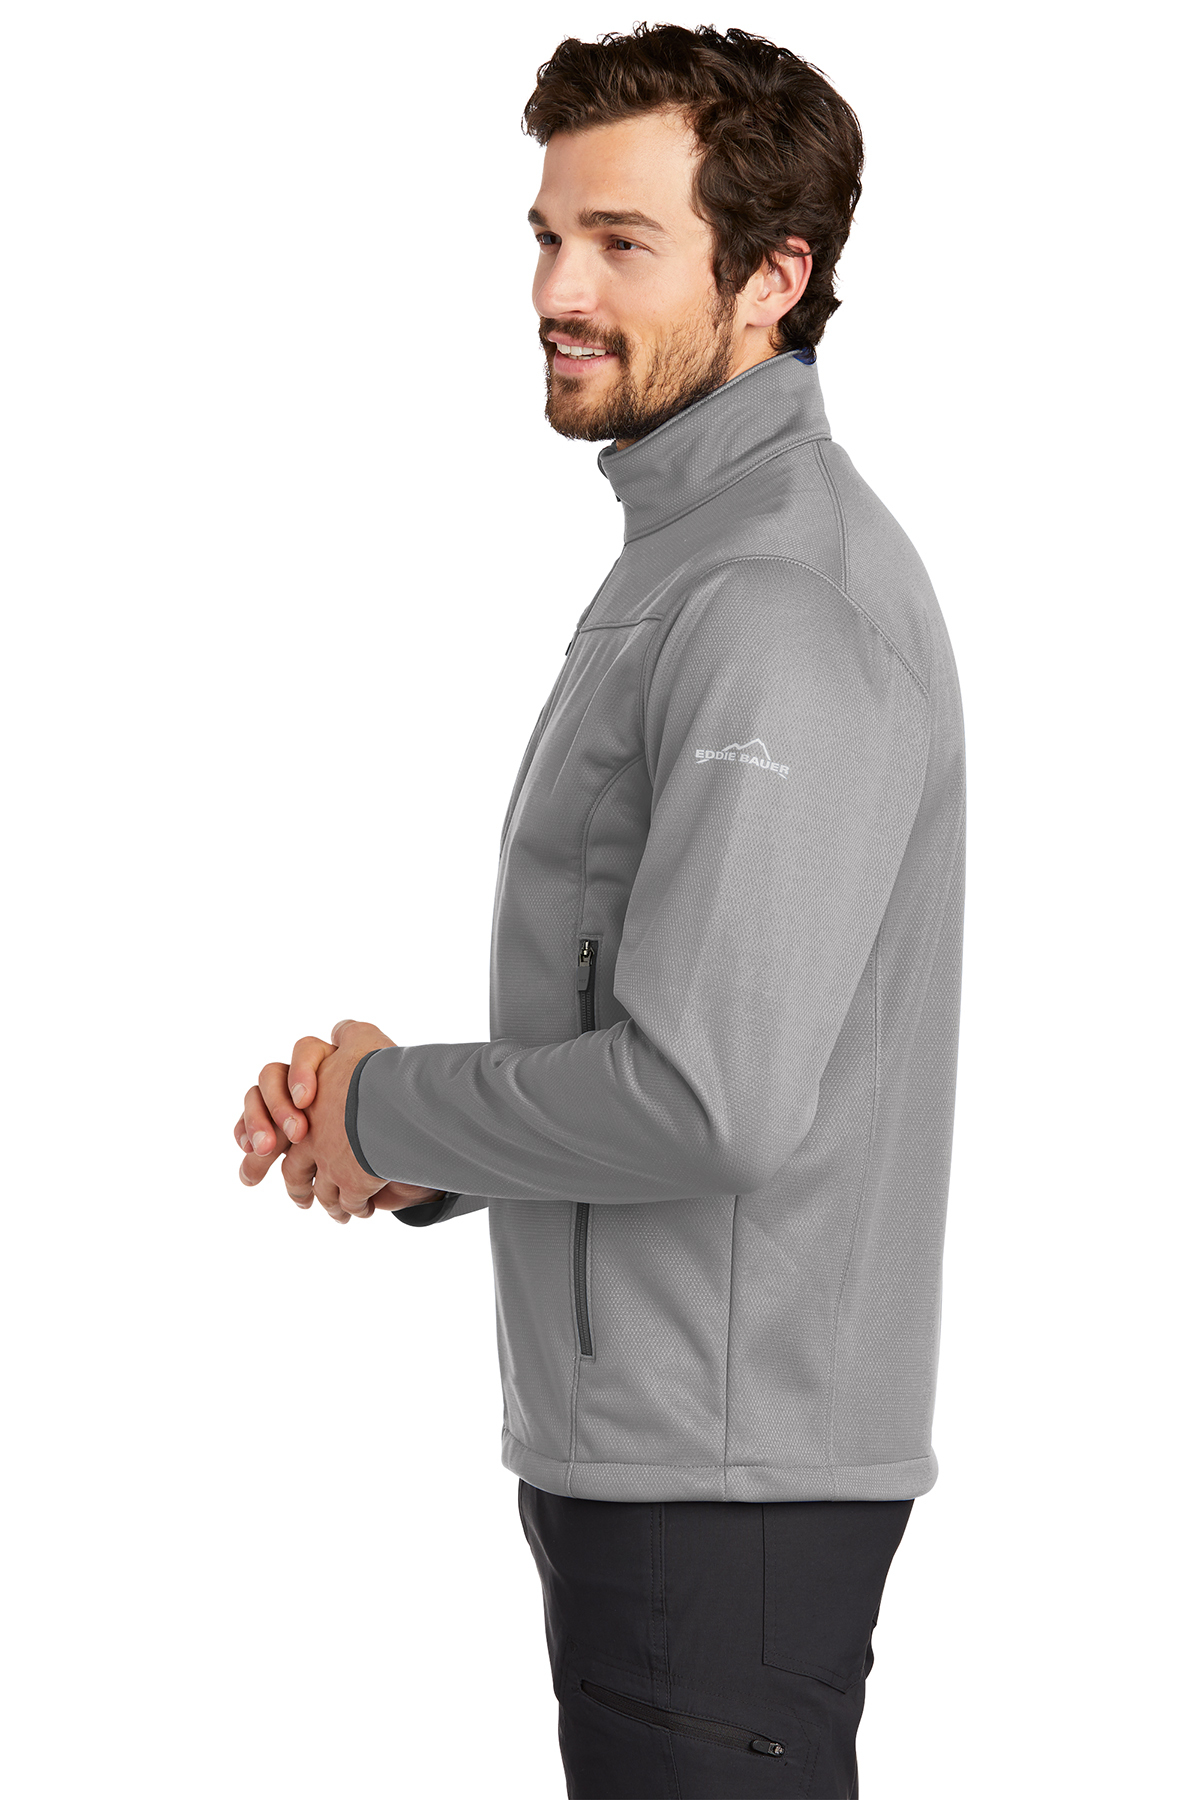 Eddie Bauer Weather-Resist Soft Shell Jacket, Product